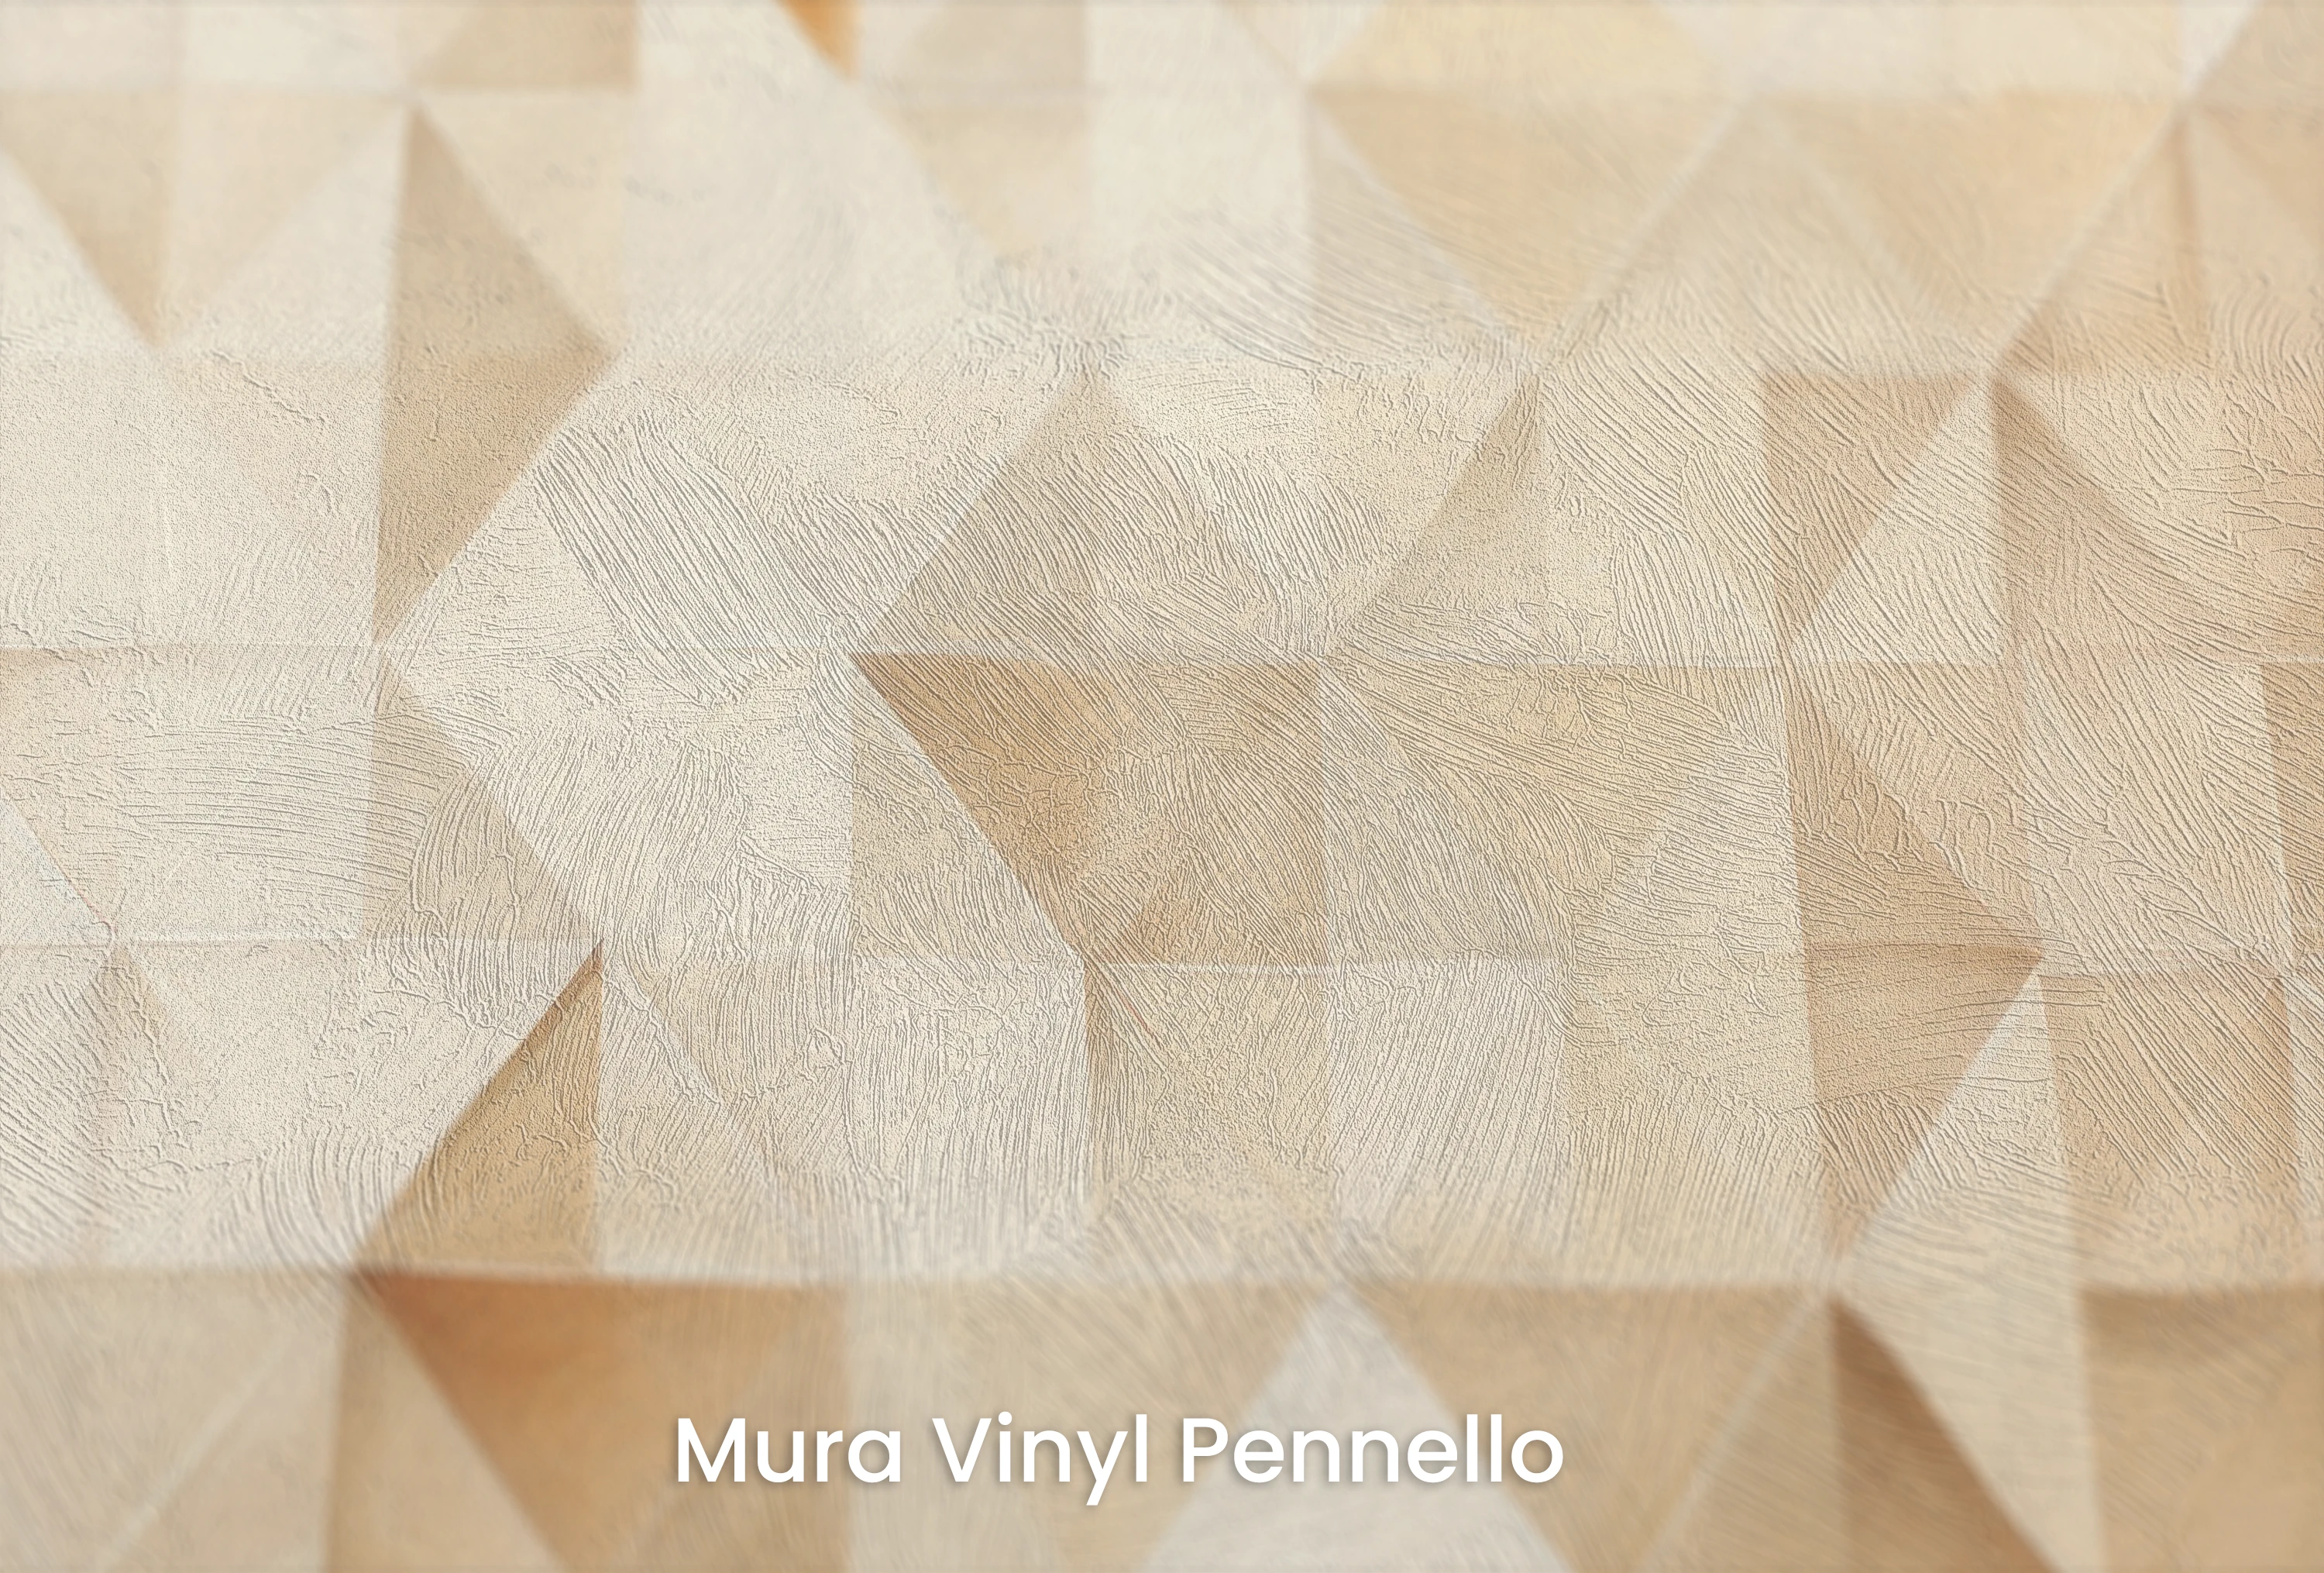 Mura Vinyl Pennello - Wallpaper with the texture of paint brush strokes